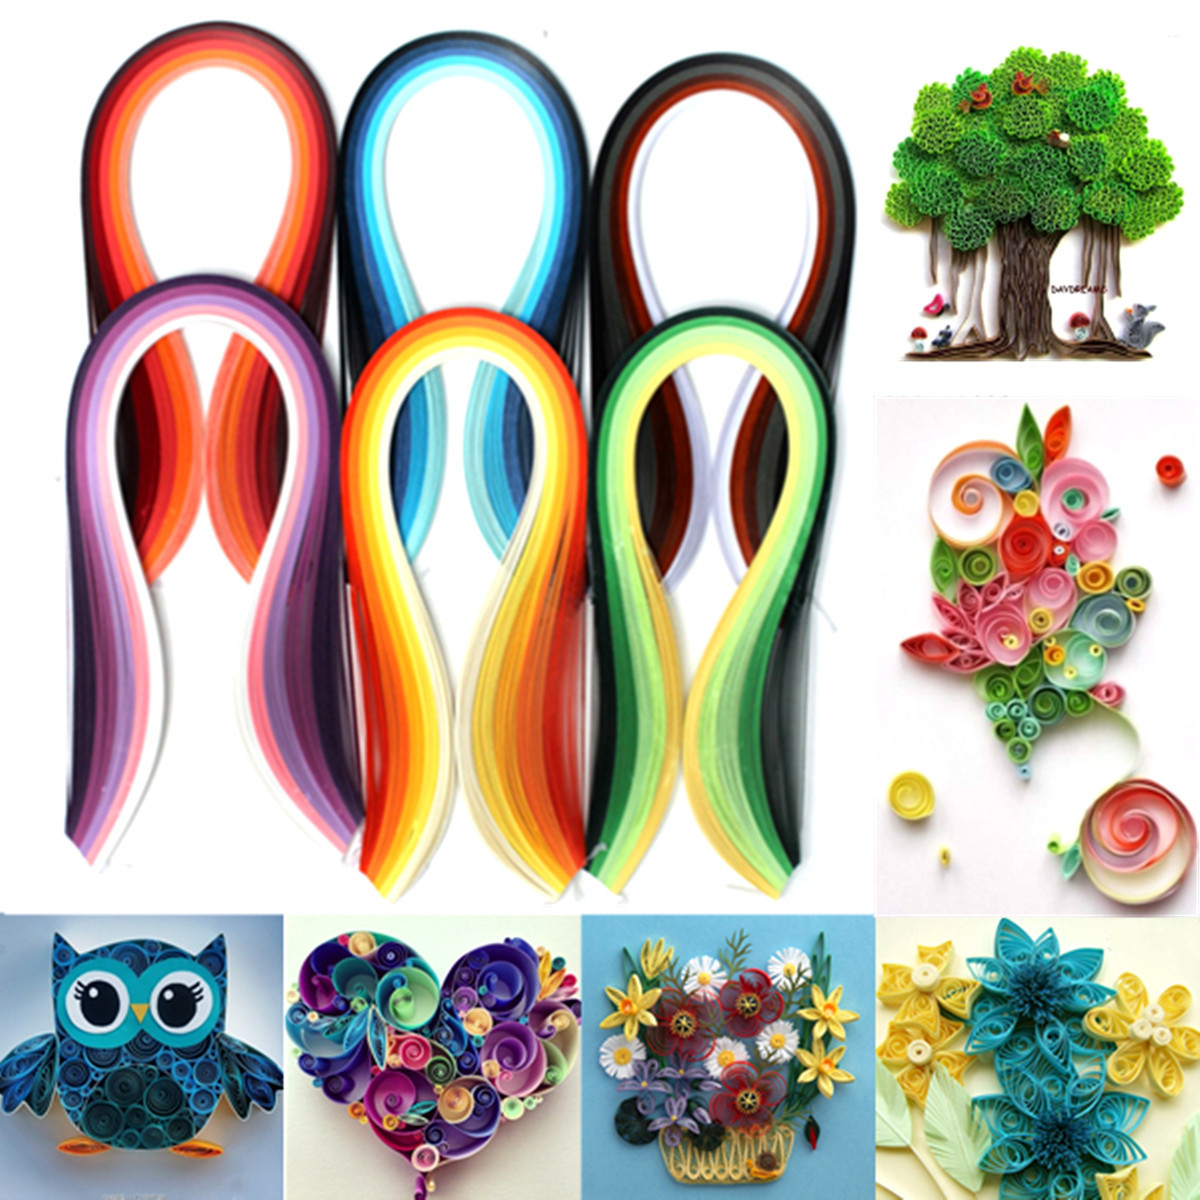 

600 Strips 30 Colors Mixed Quilling Paper Art Origami Papercraft DIY Craft